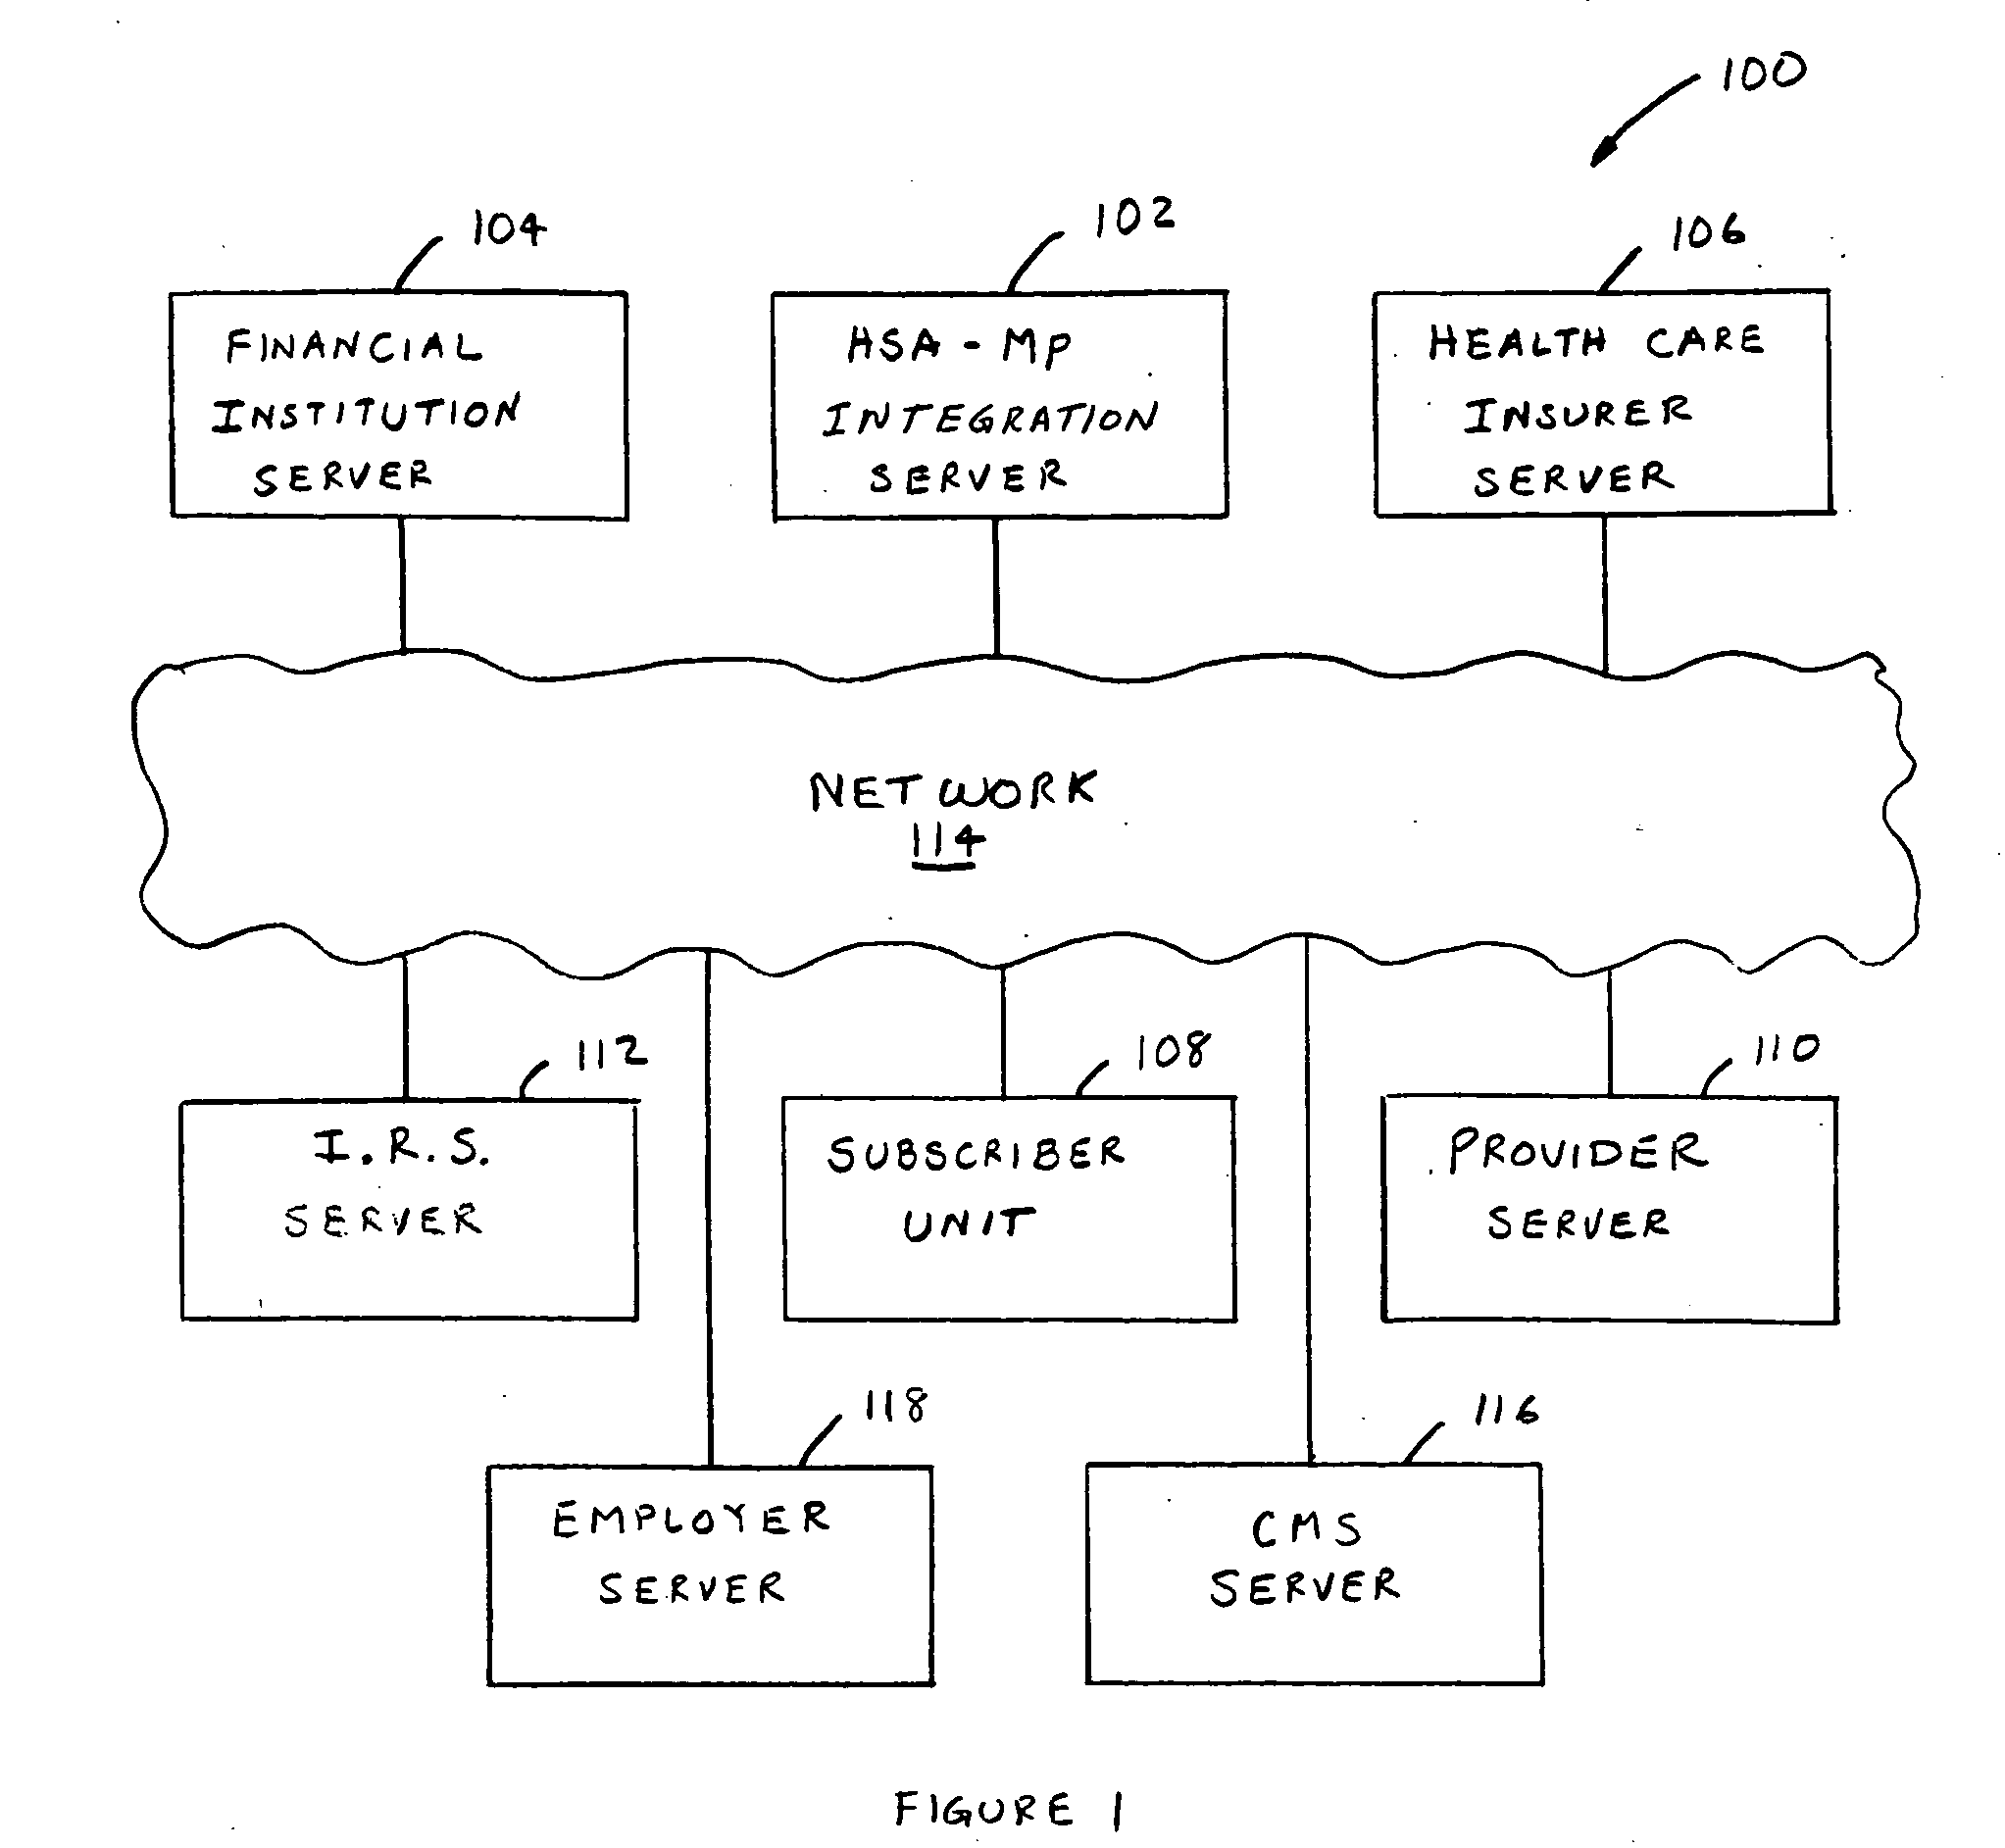 System and method of integrating information related to health care savings accounts and health care plans